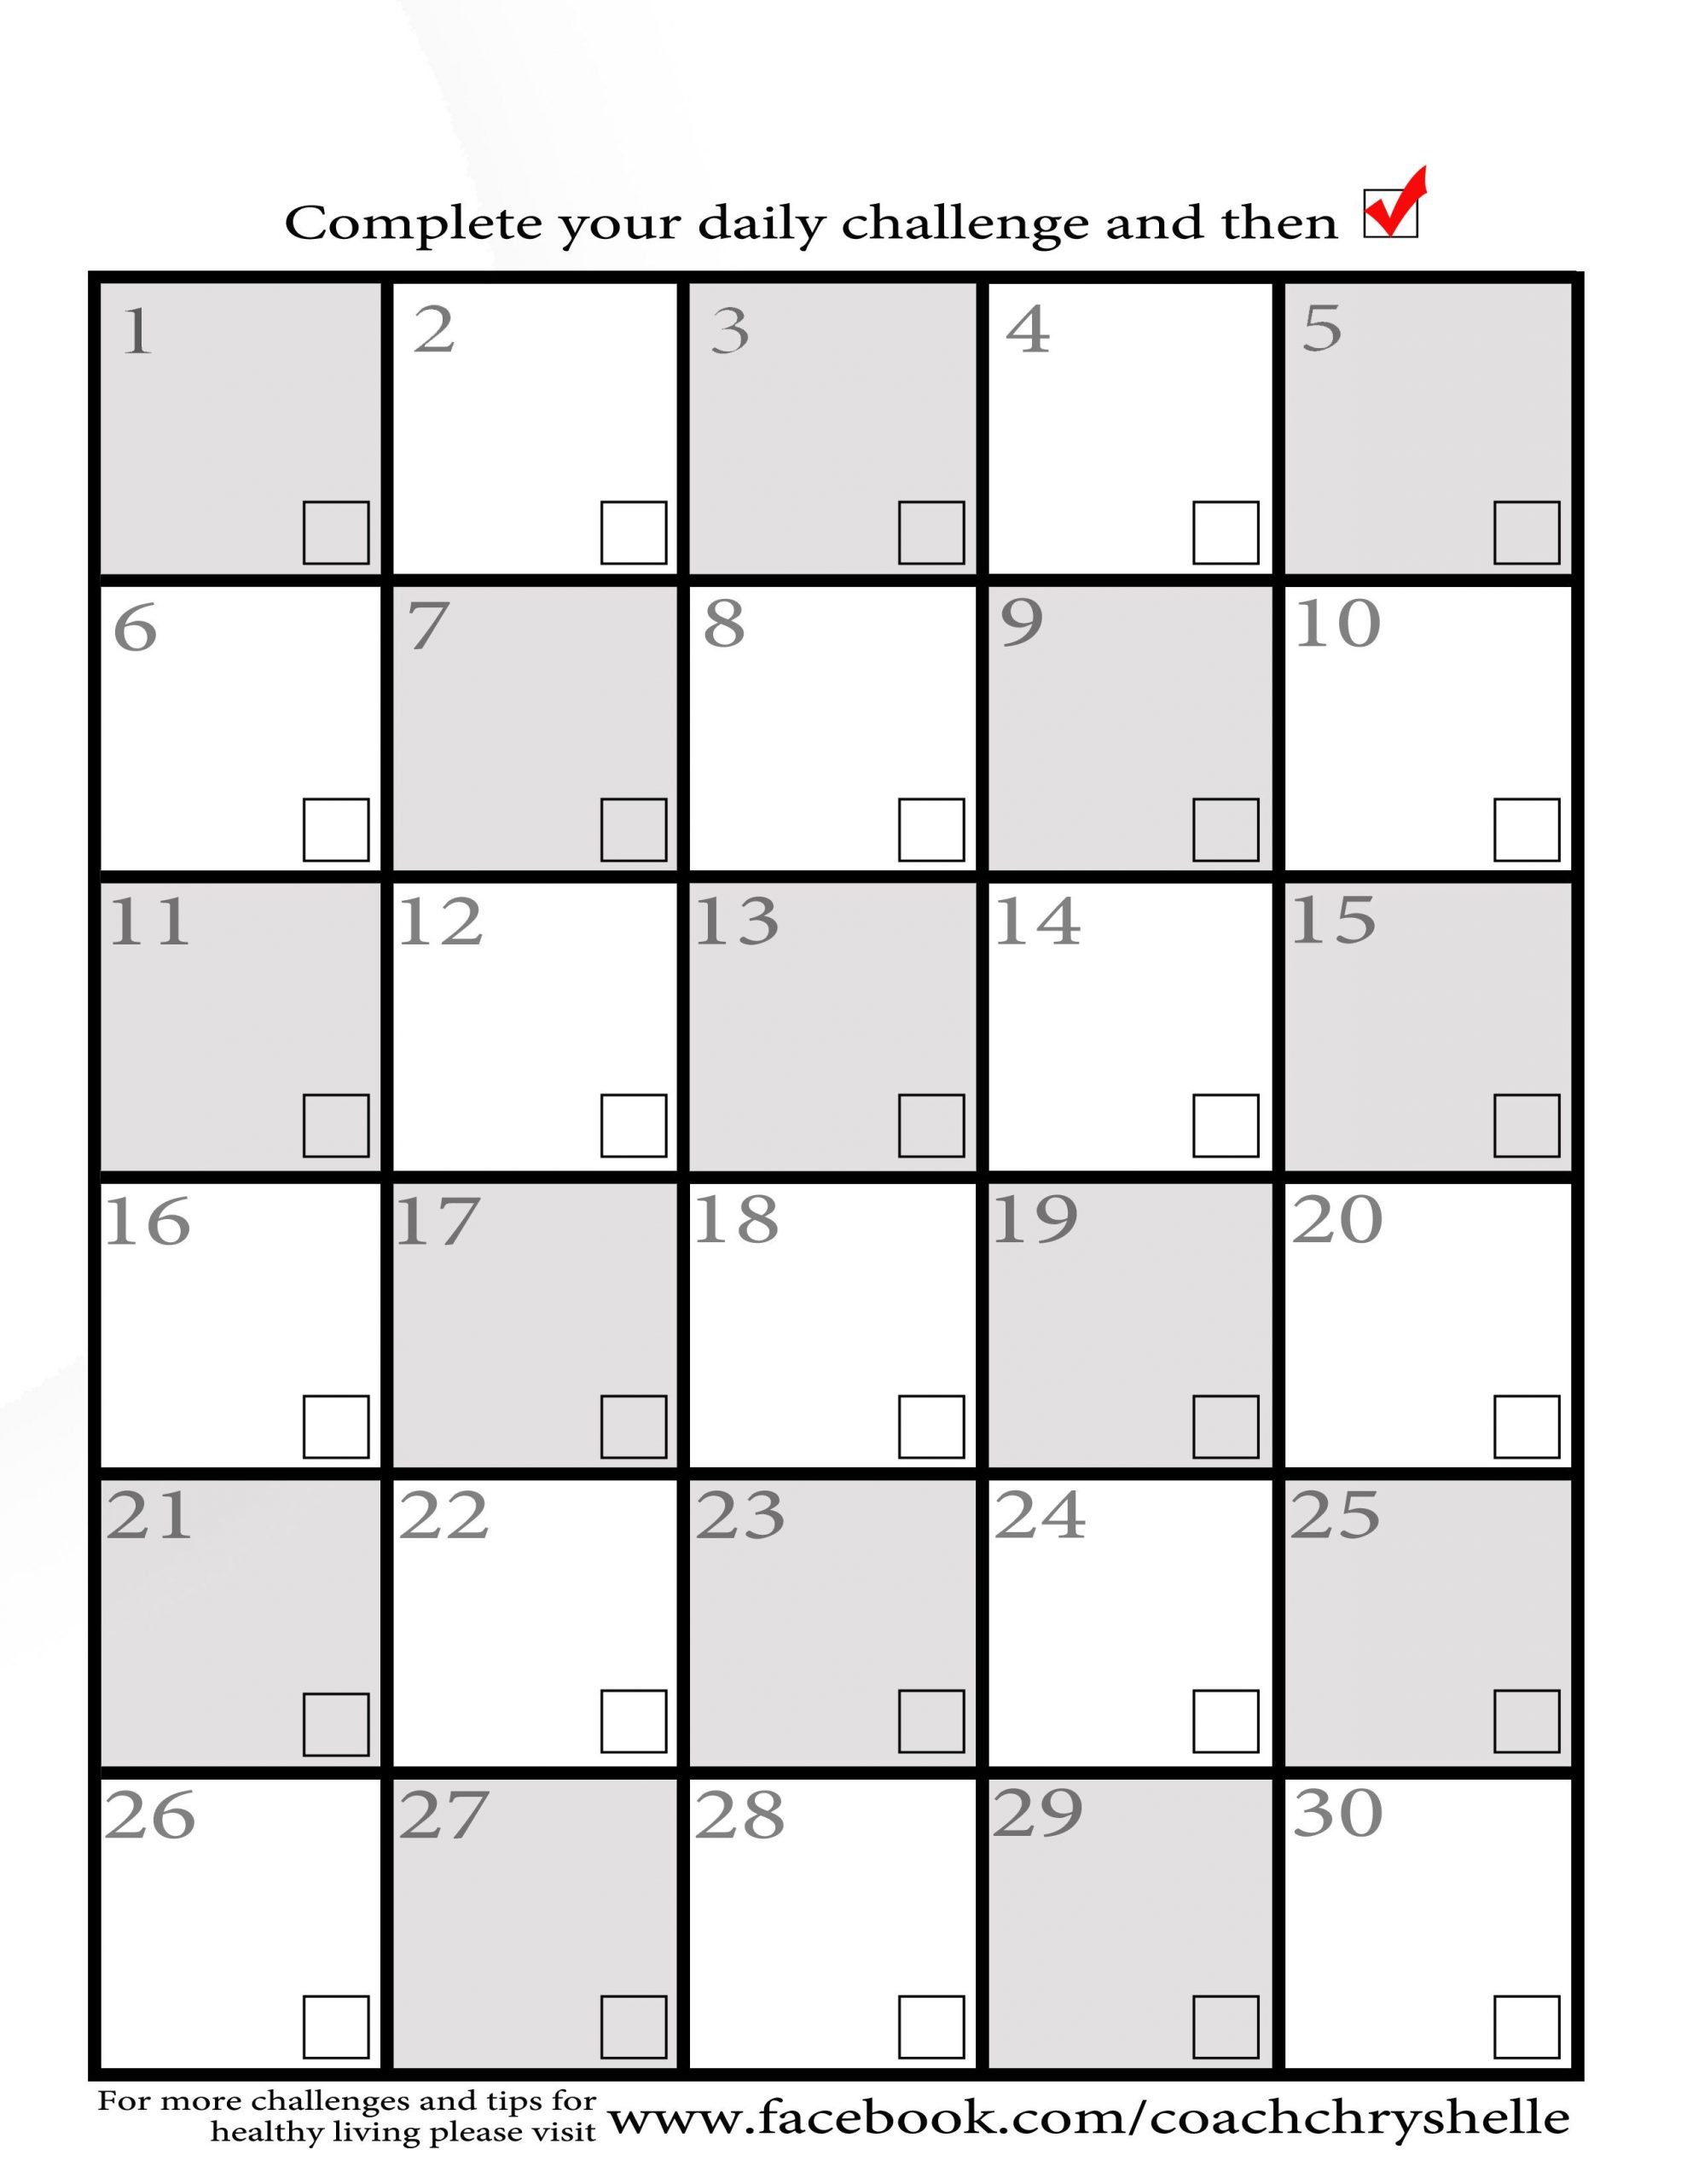 Blank Challenge Workout Meal Planning 30 Day Worksheet